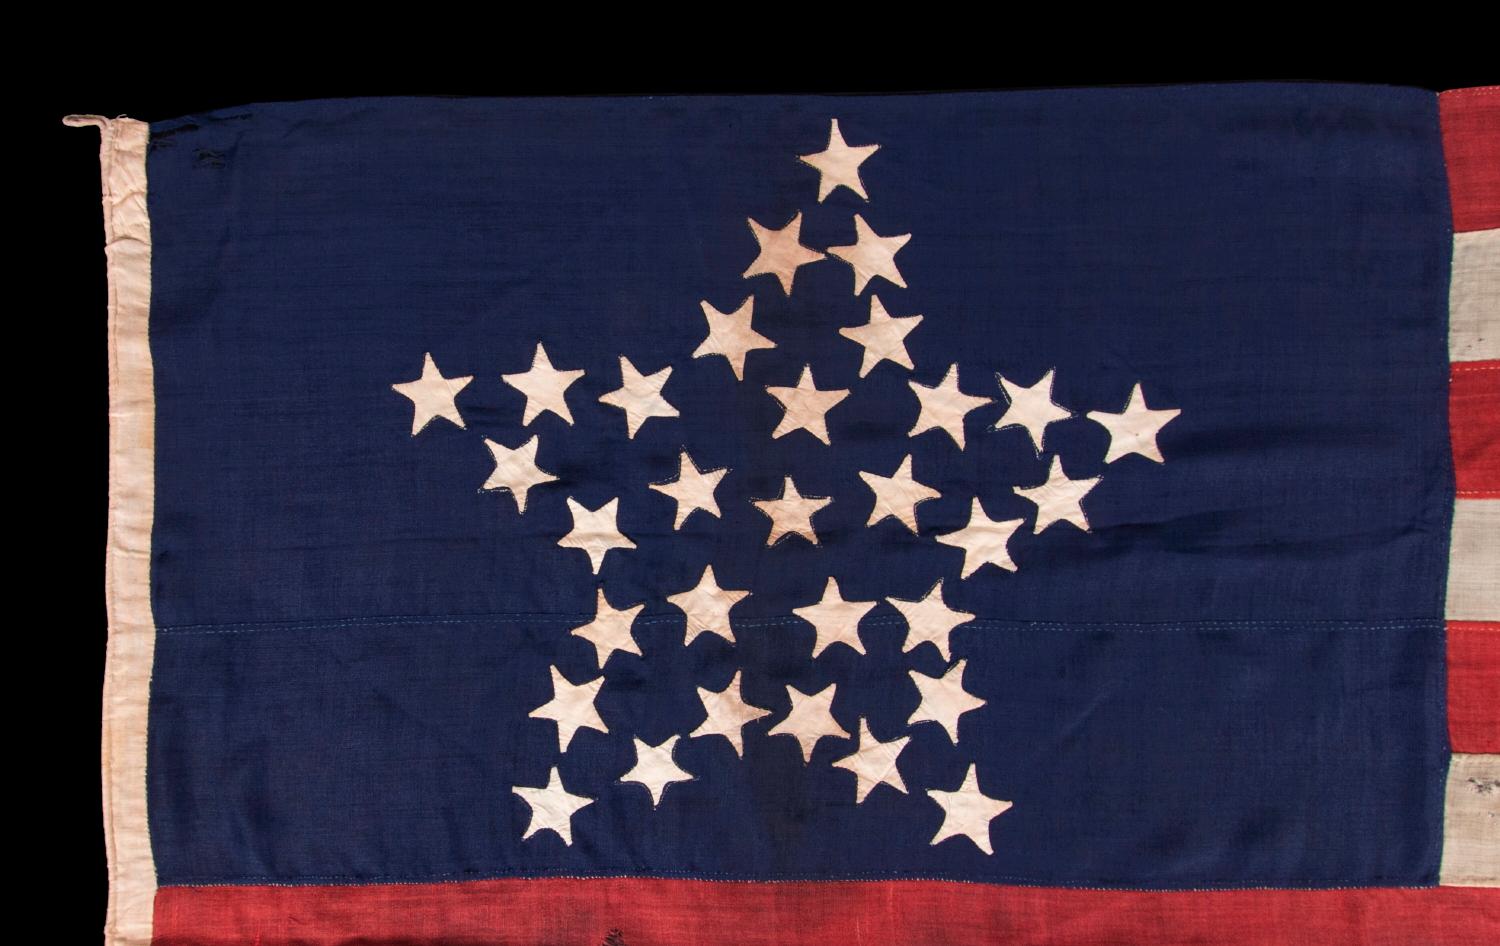 how are the stars on the american flag arranged